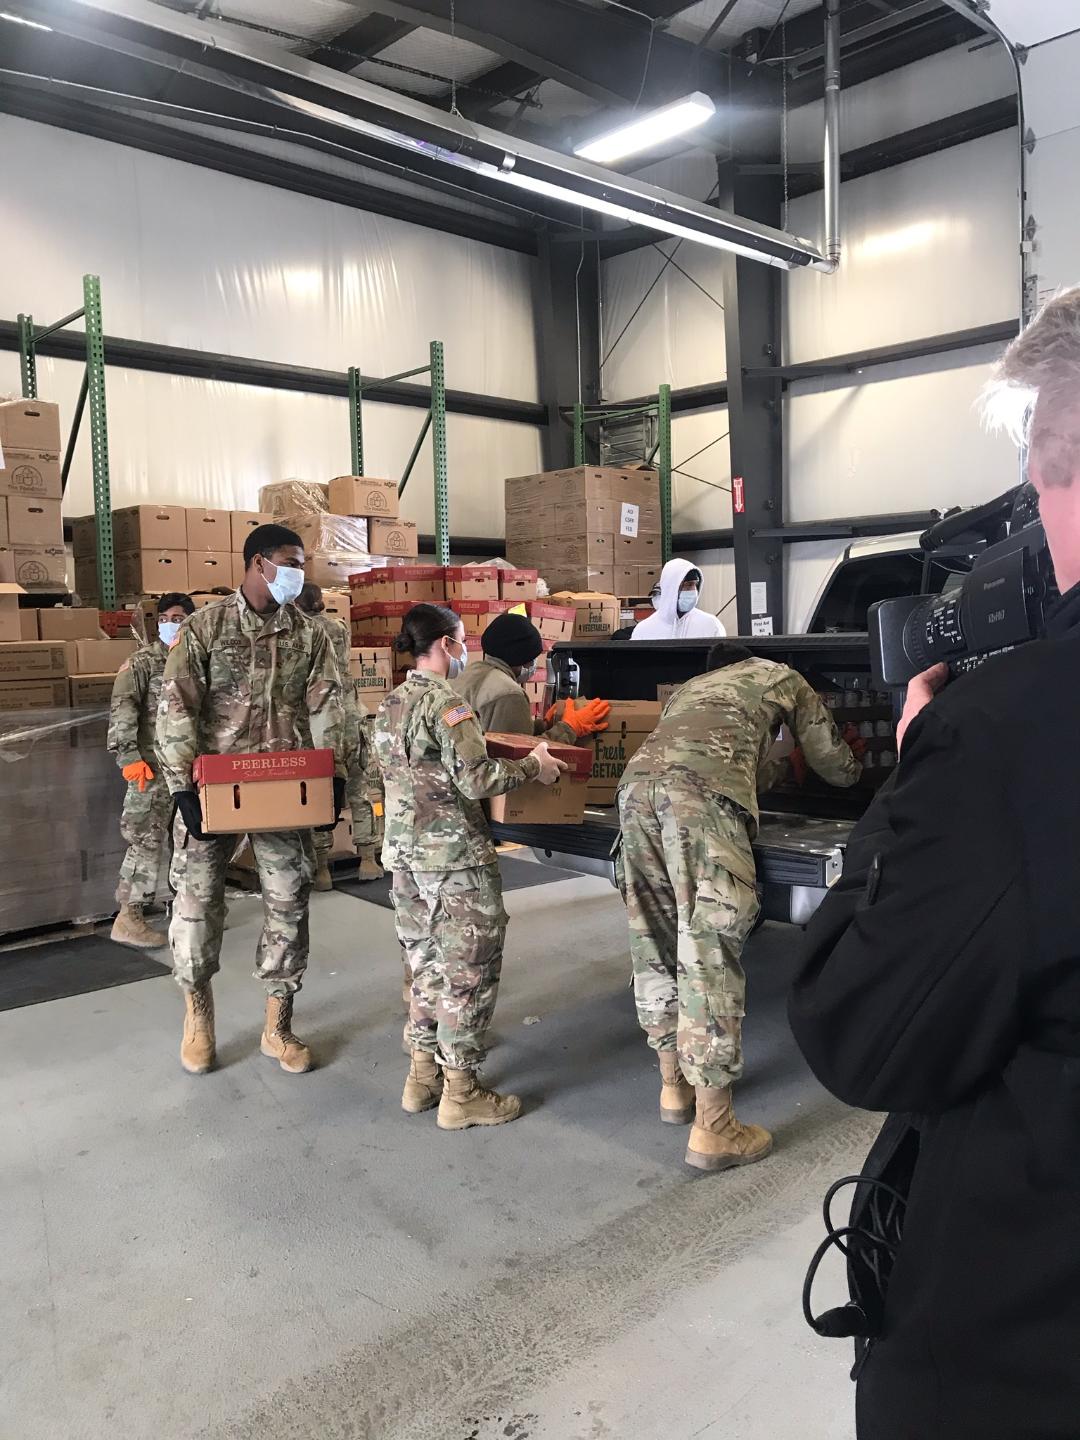 Soldiers load boxes into truck inside warehouse.